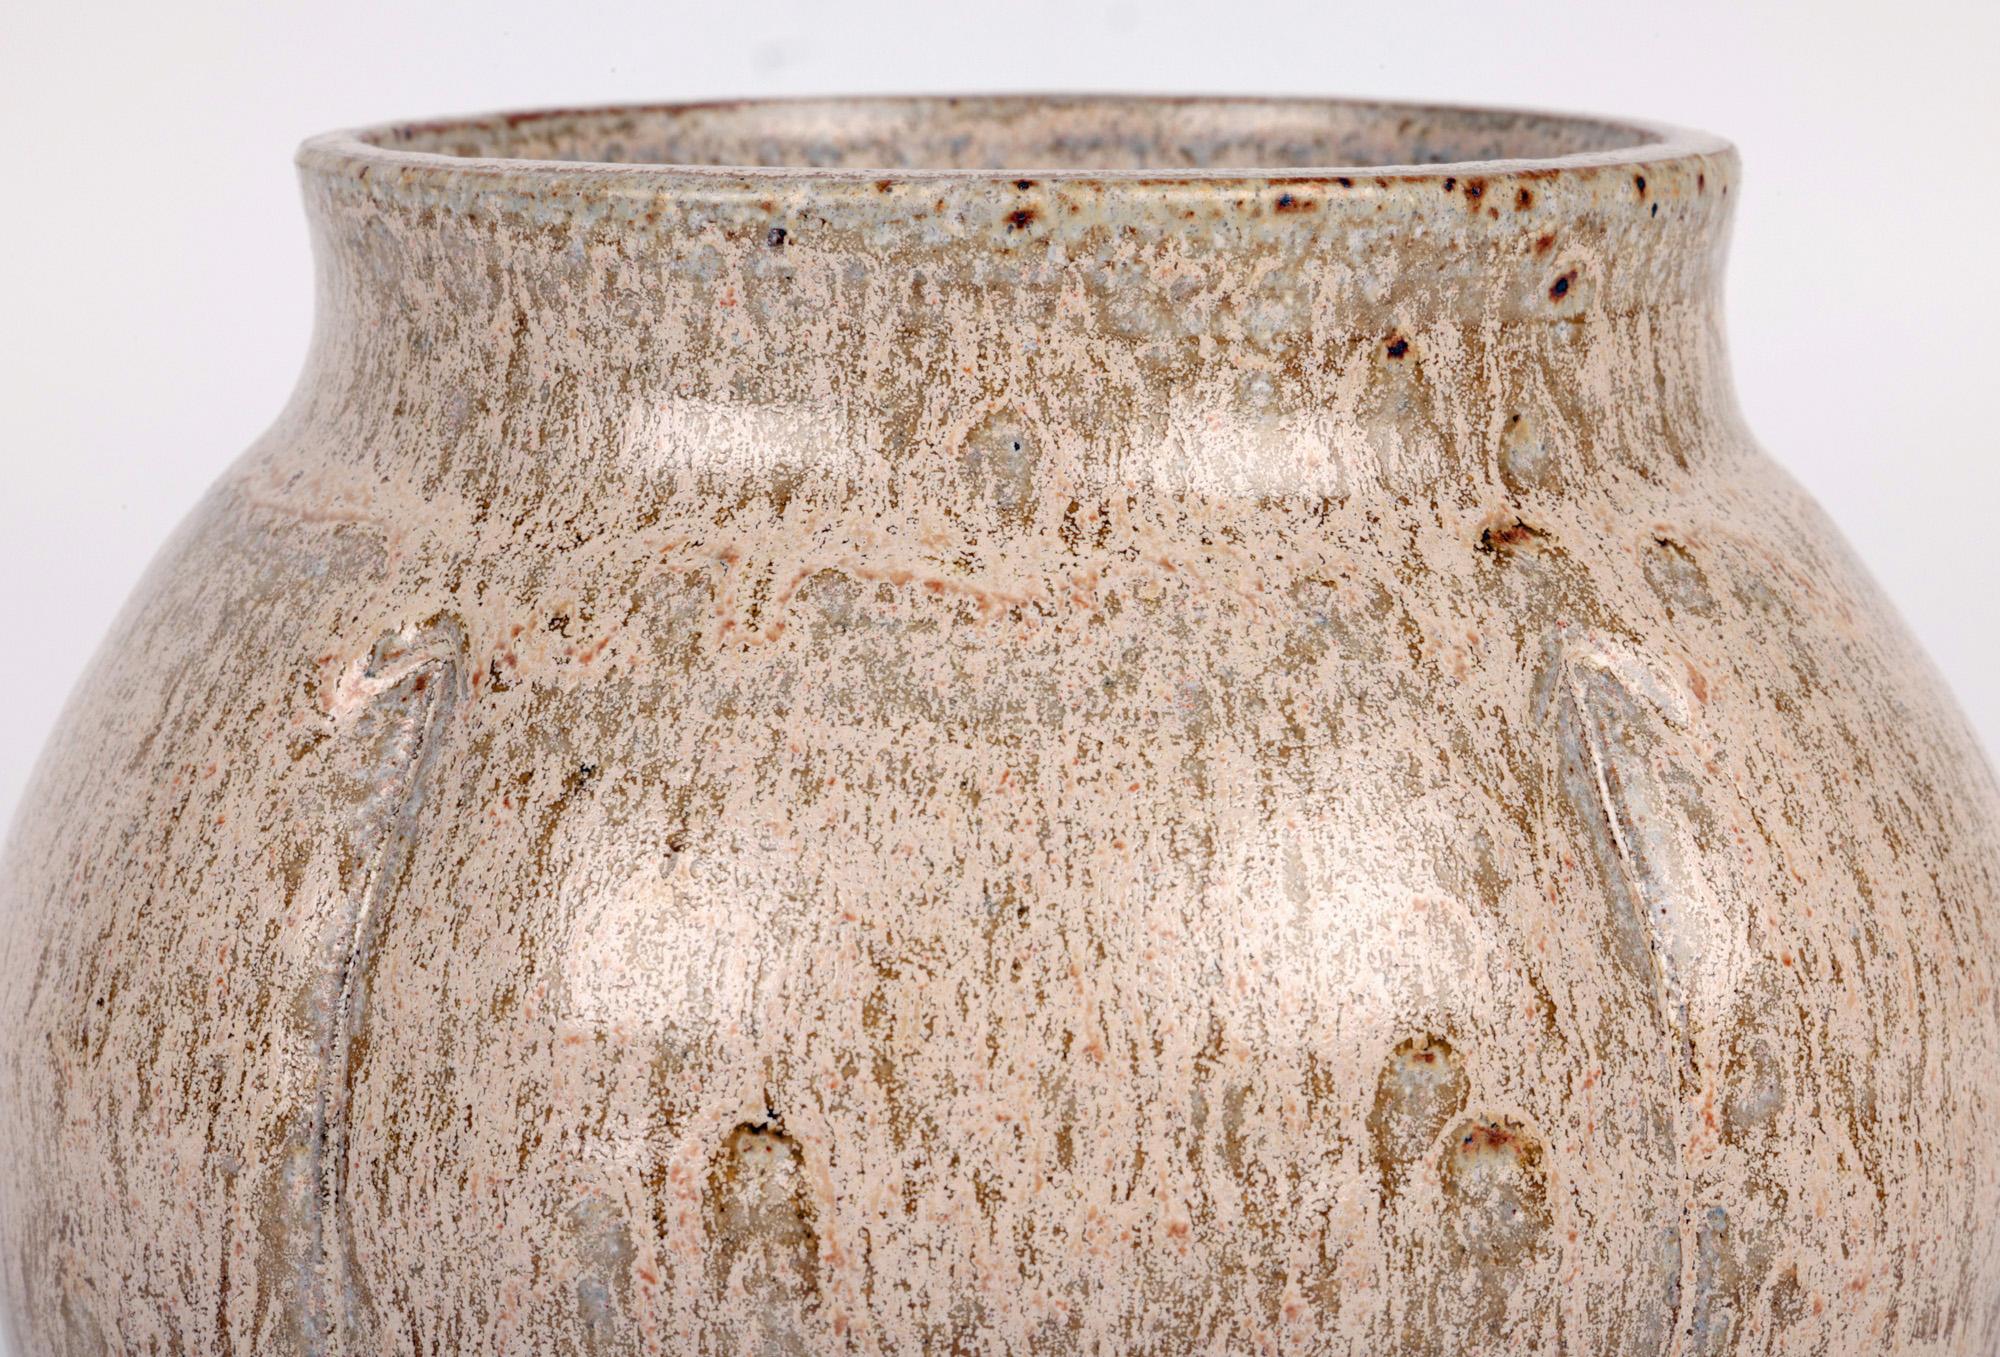 A stunning studio pottery oatmeal glazed vase by renowned Cambridgeshire based potter Sonia Lewis acquired from a large collection and believed to date from the latter 20th century. This finely potted stoneware vase stands on a wide round unglazed